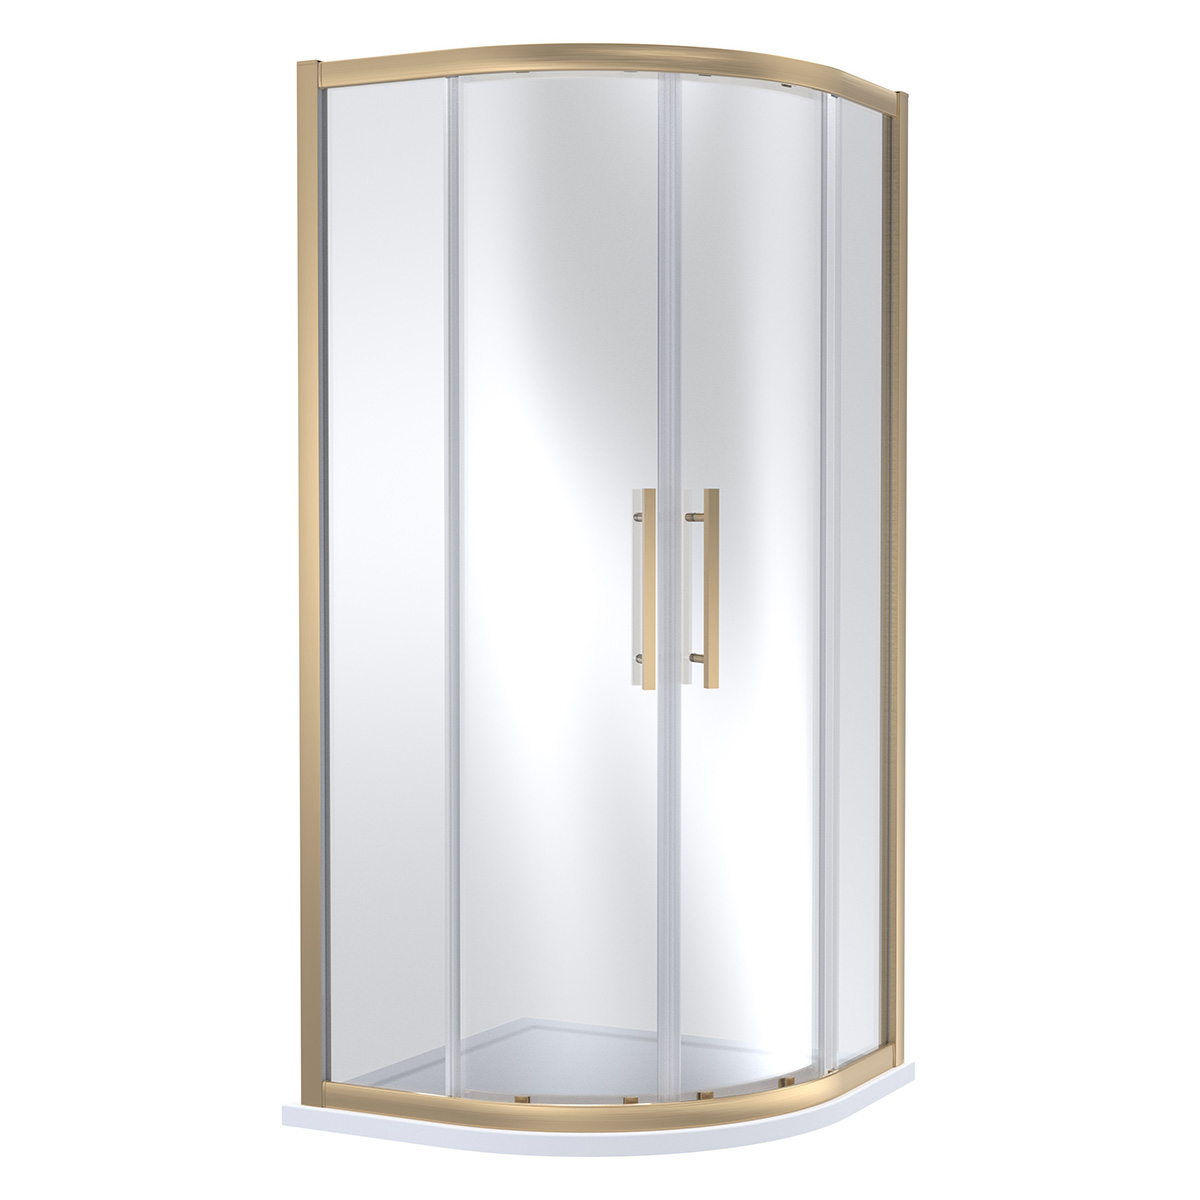 Hudson Reed 900mm Quadrant Shower Enclosure with Square Handle - Brushed Brass